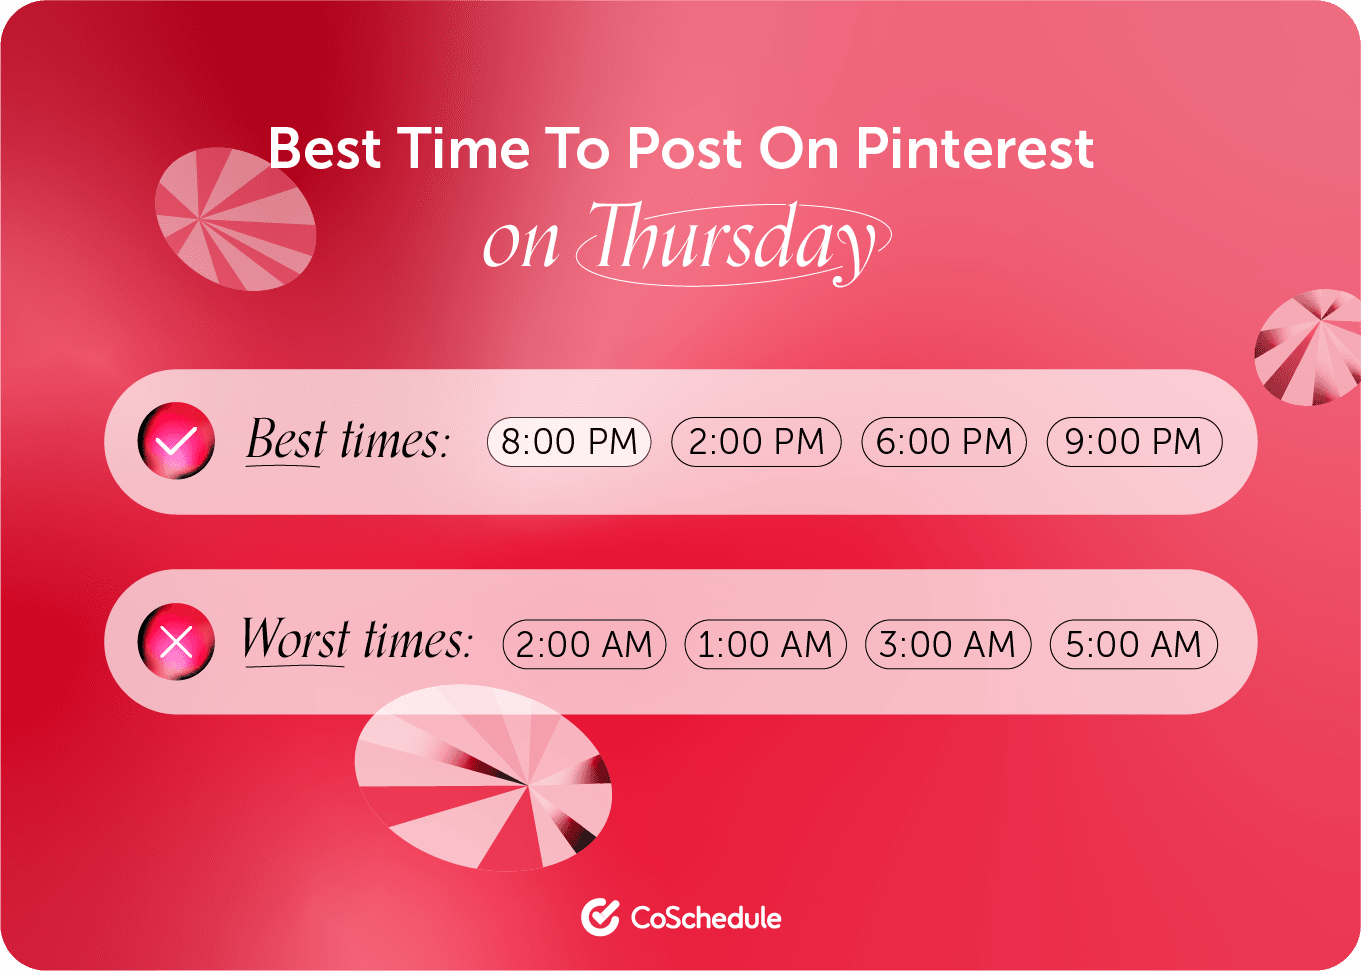 CoSchedule graphic on the best times to post on Pinterest Thursday